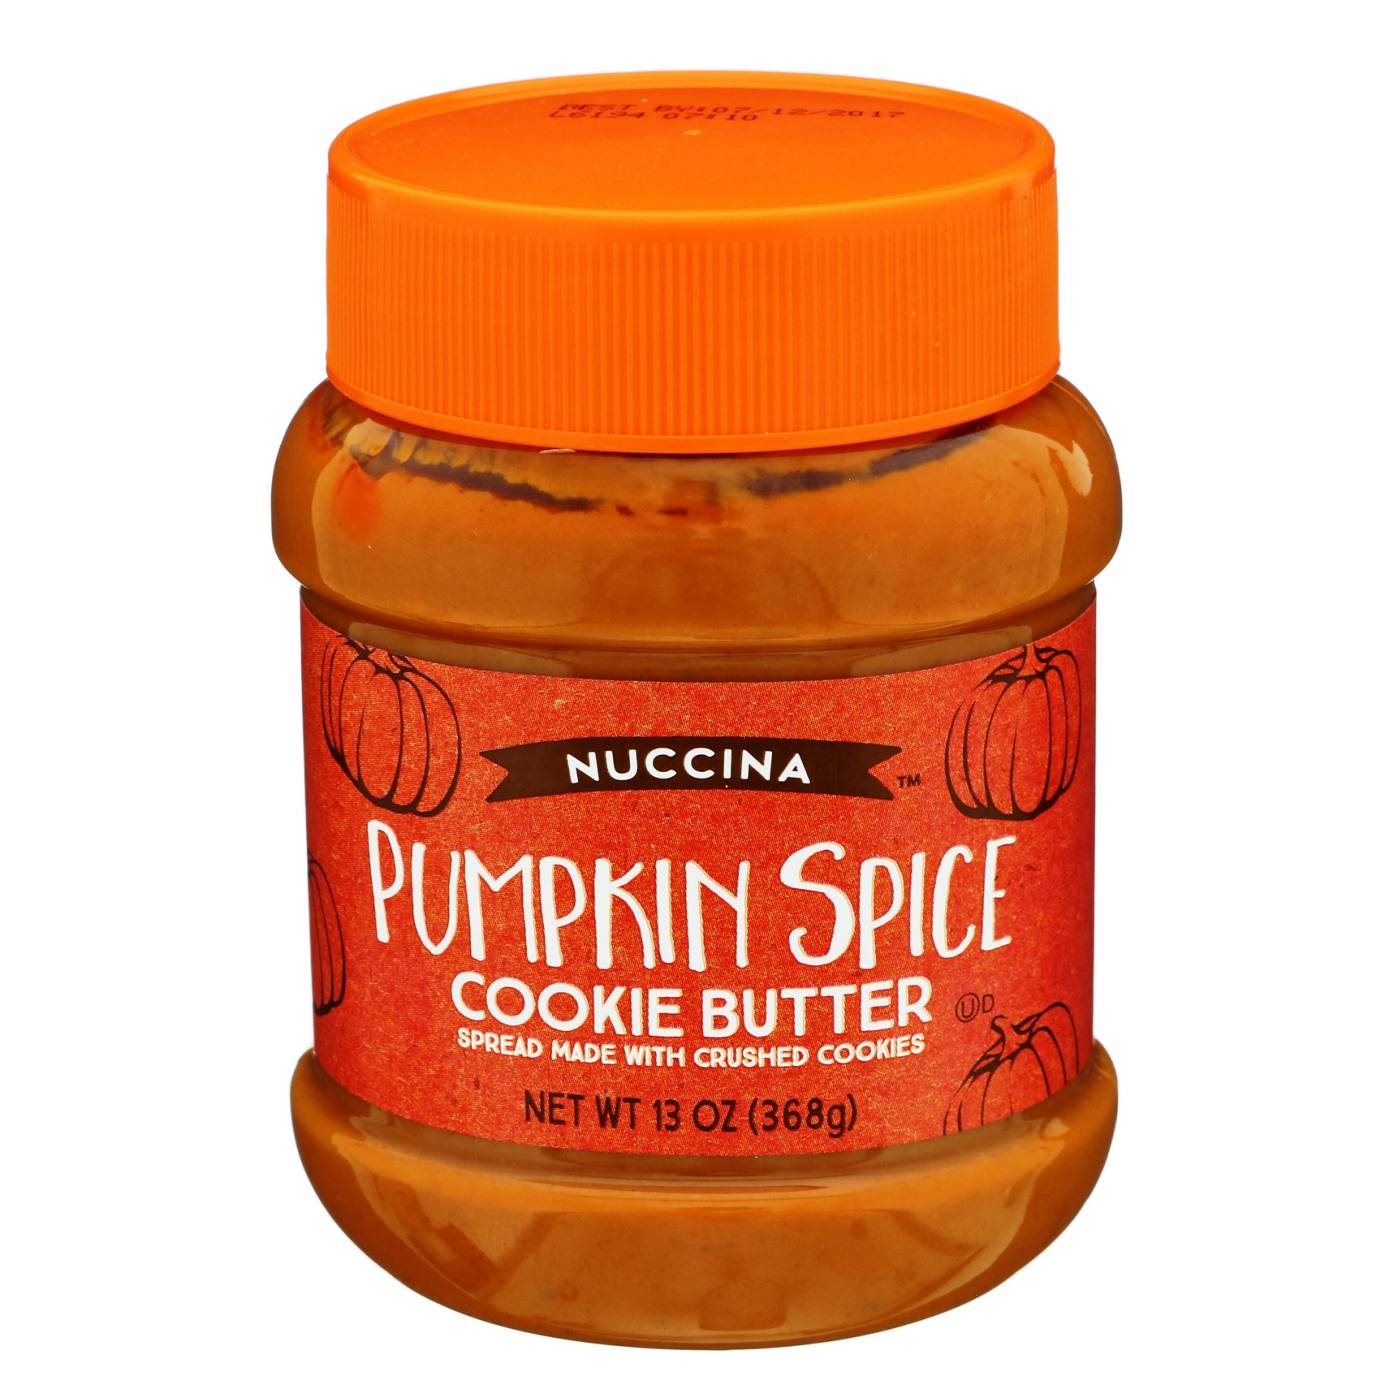 Nuccina Pumpkin Spice Cookie Butter; image 1 of 2